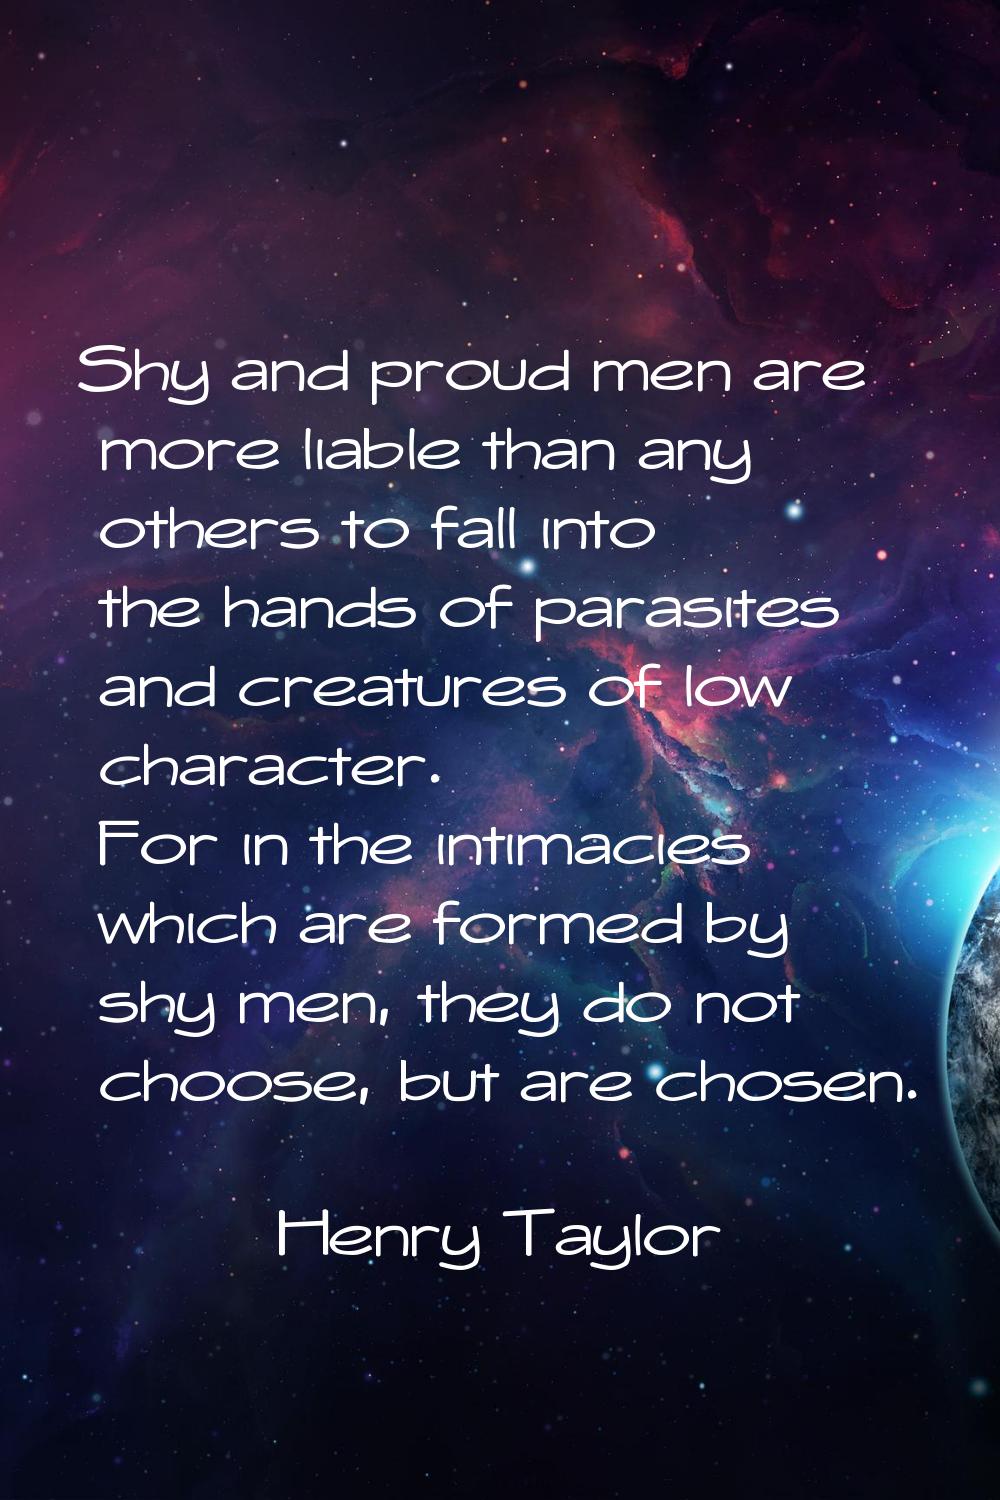 Shy and proud men are more liable than any others to fall into the hands of parasites and creatures